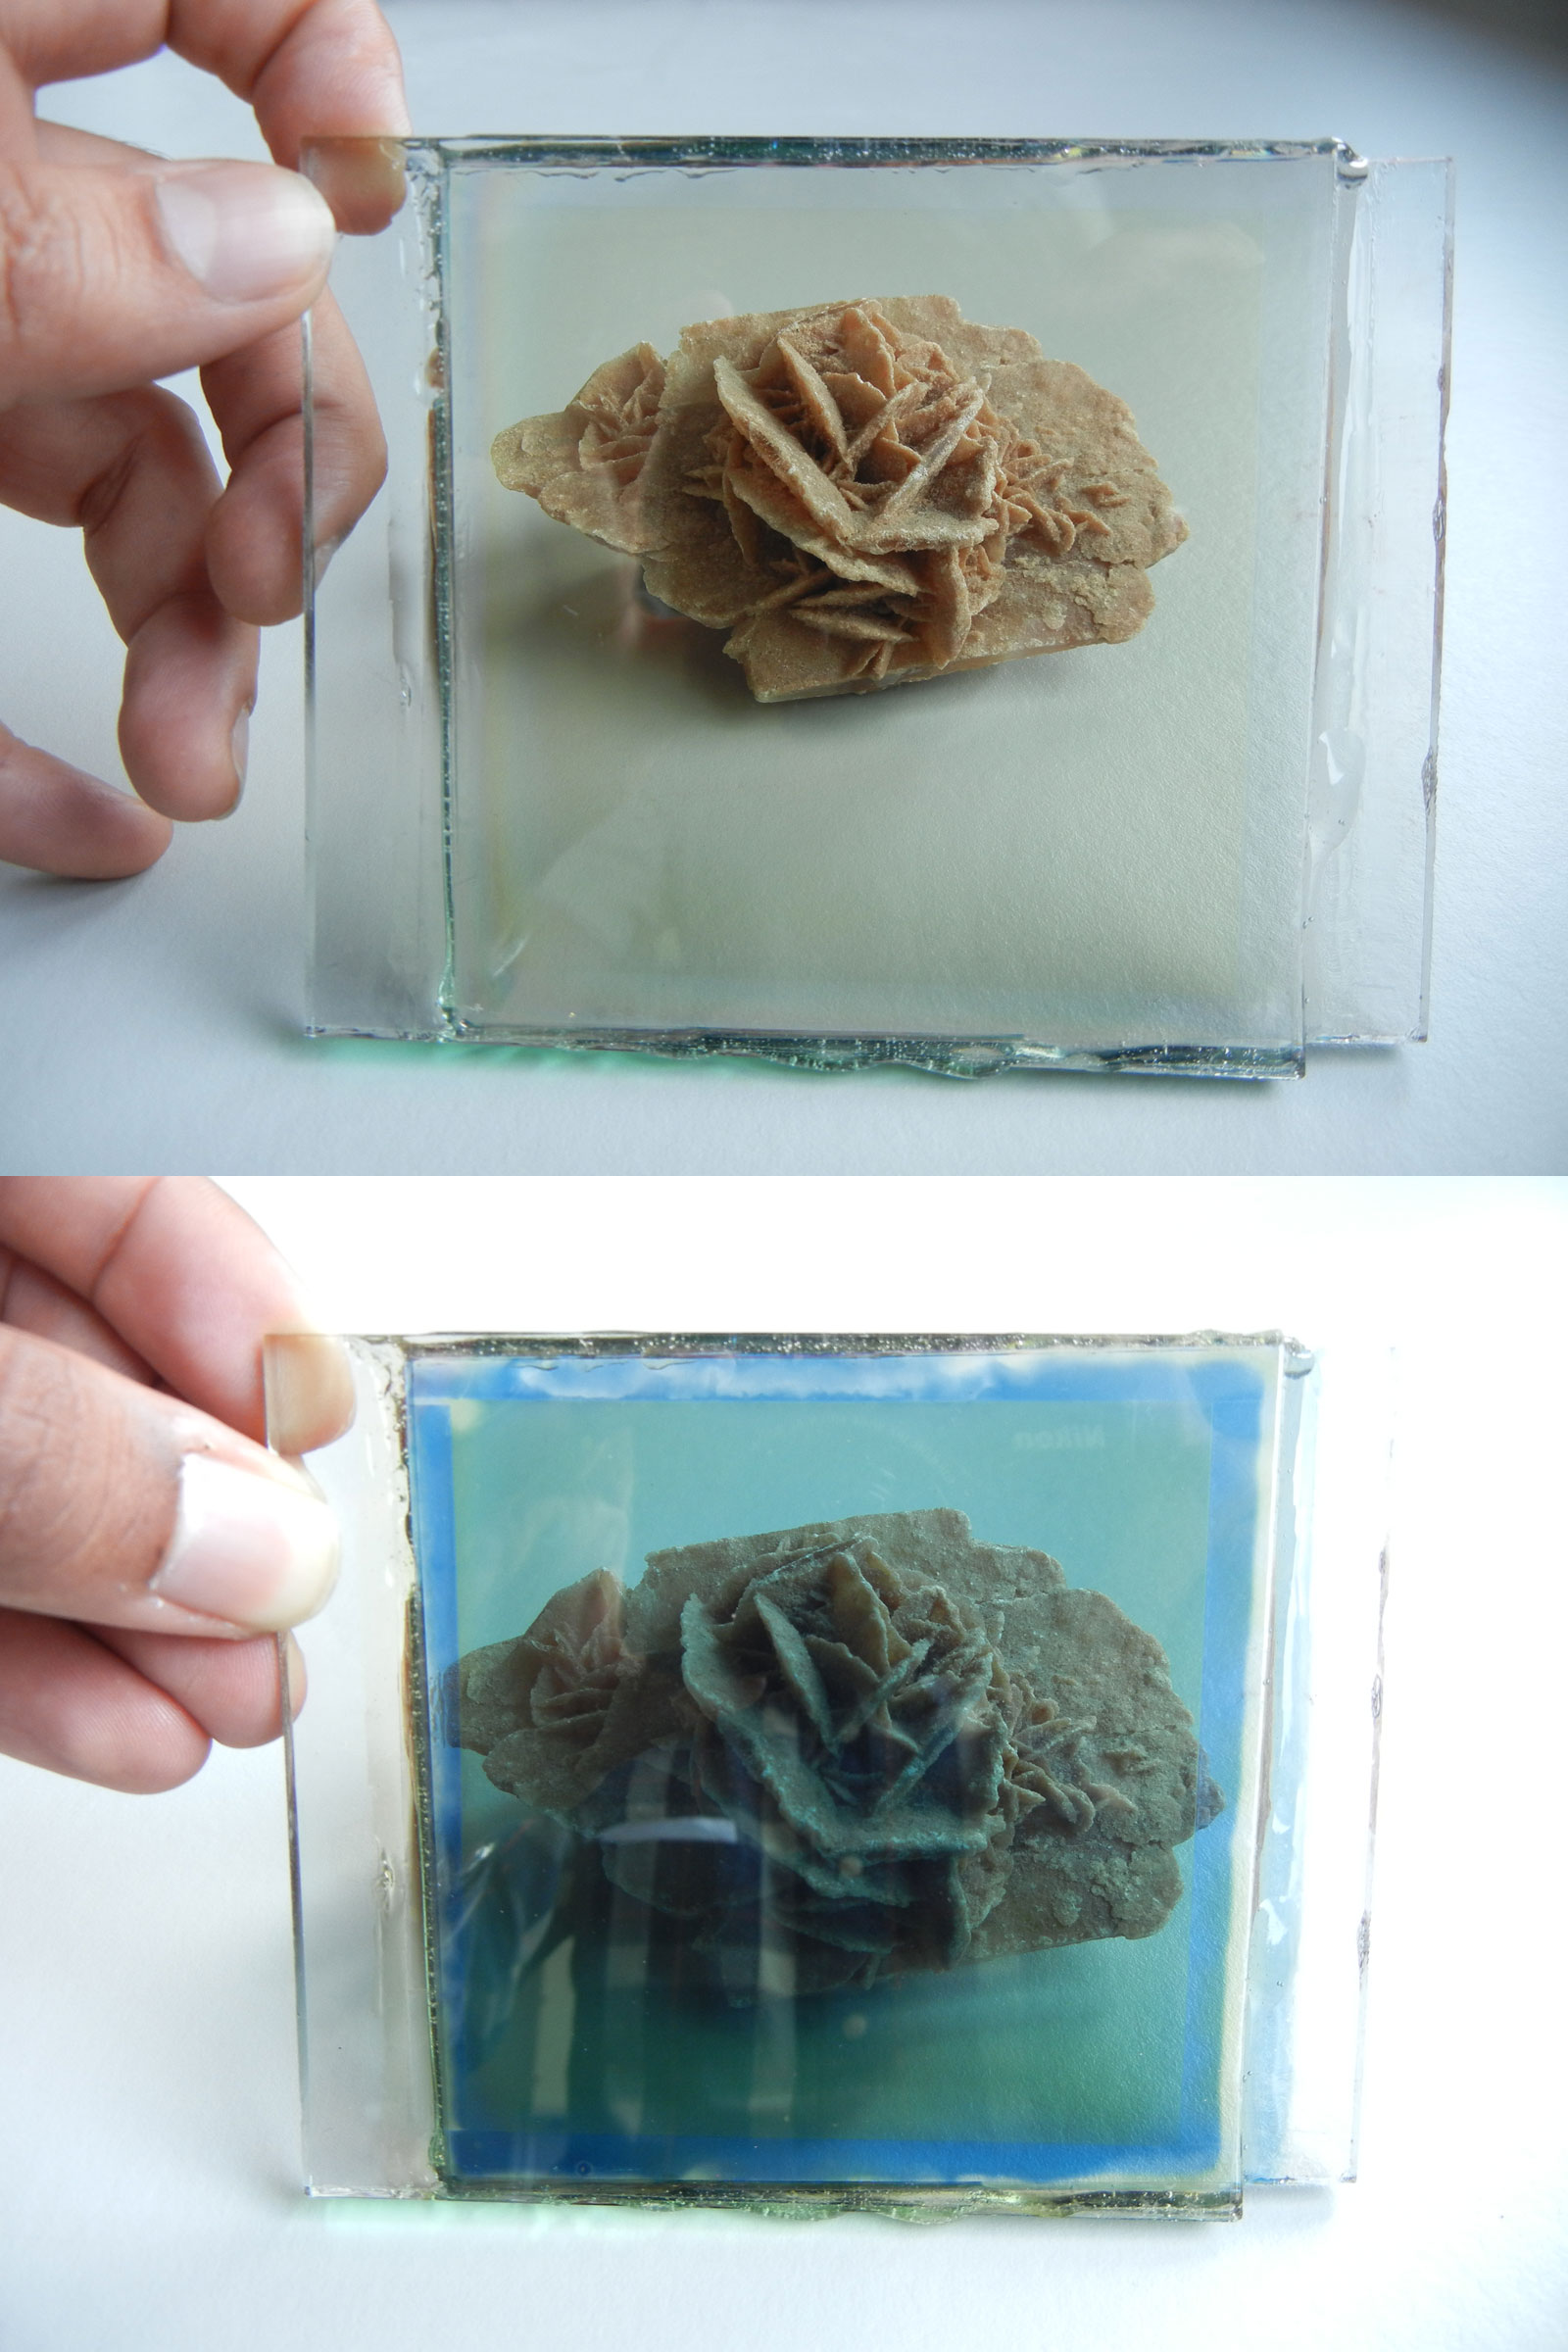 Photo-electrochromic system with sputtered layers made of tungsten oxide and titanium oxide in bleached state (top) and colored state (bottom).